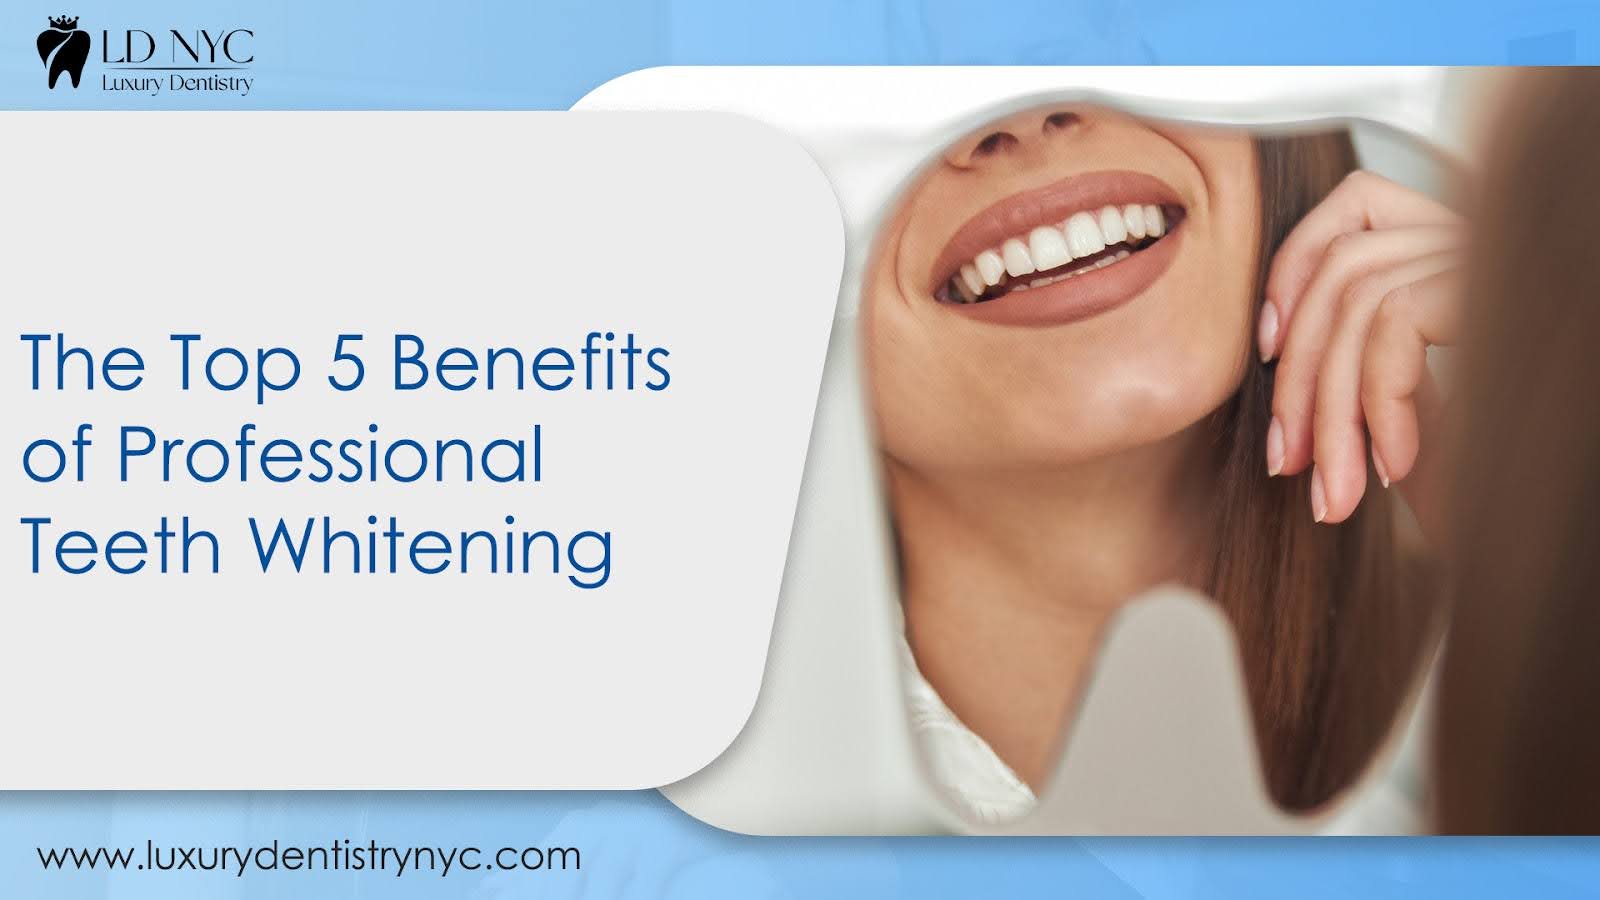 The Top 5 Benefits of Professional Teeth Whitening